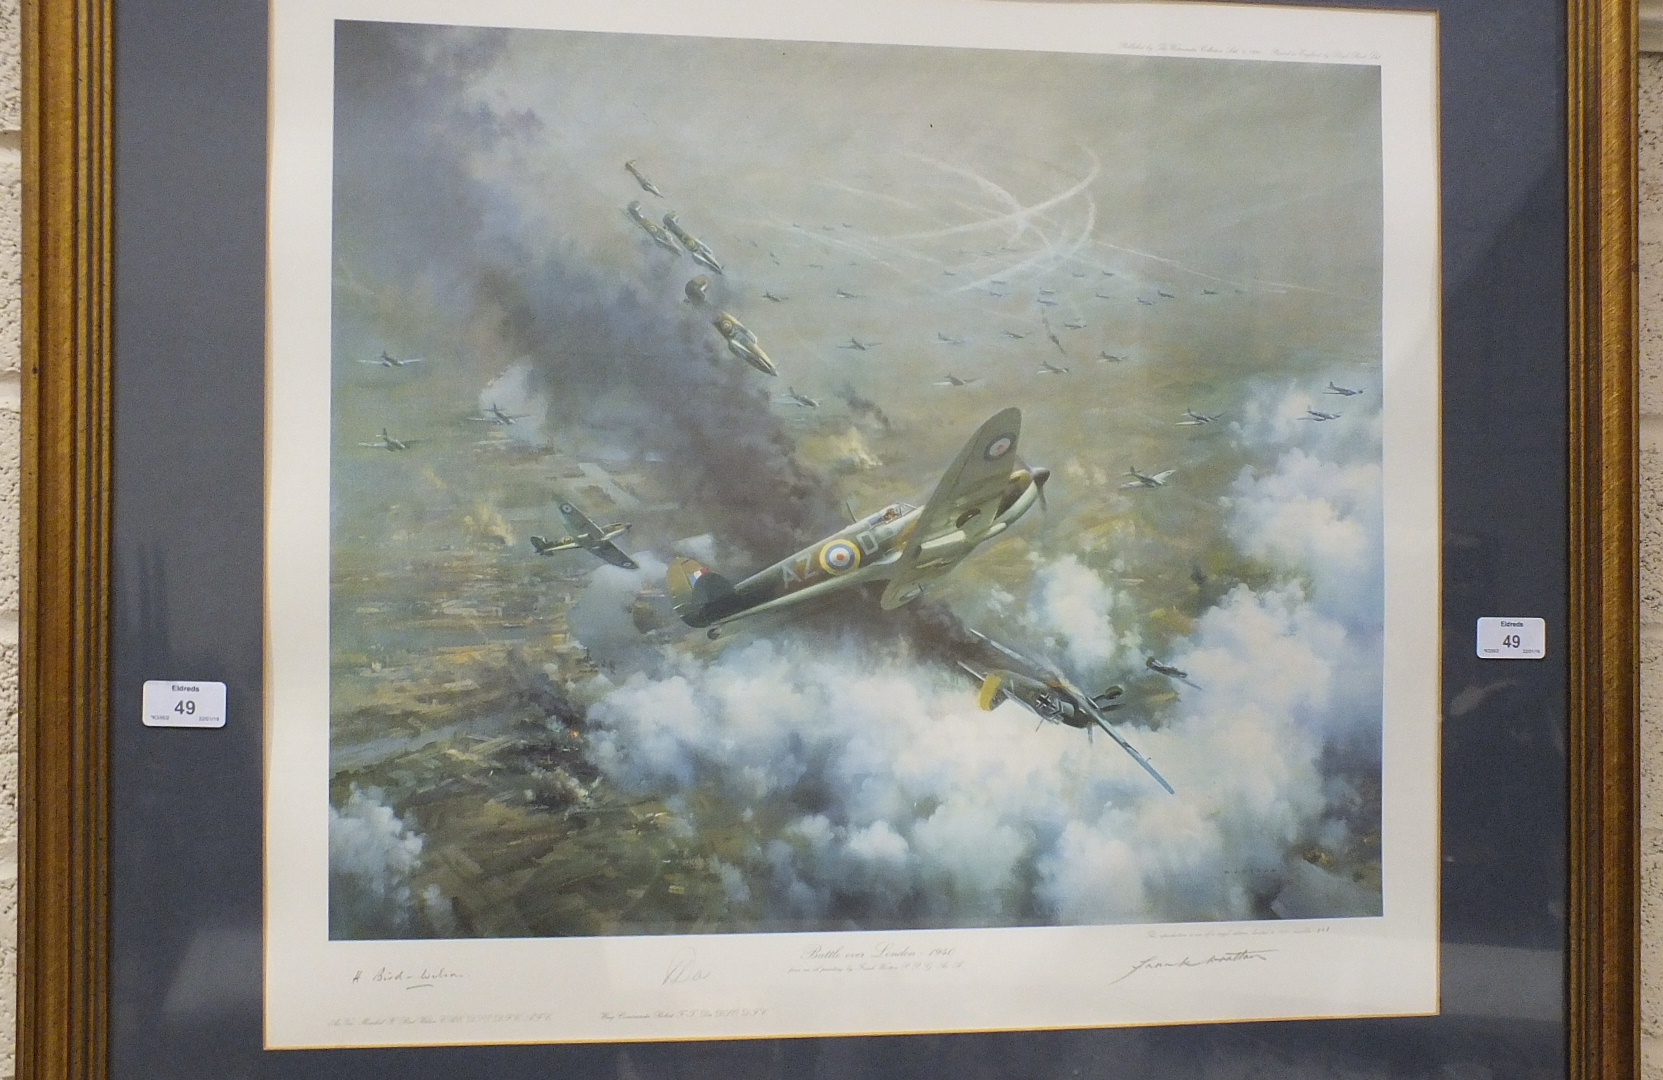 After Frank Wootton, 'Battle over London - 1940', a limited-edition coloured print, signed in pencil